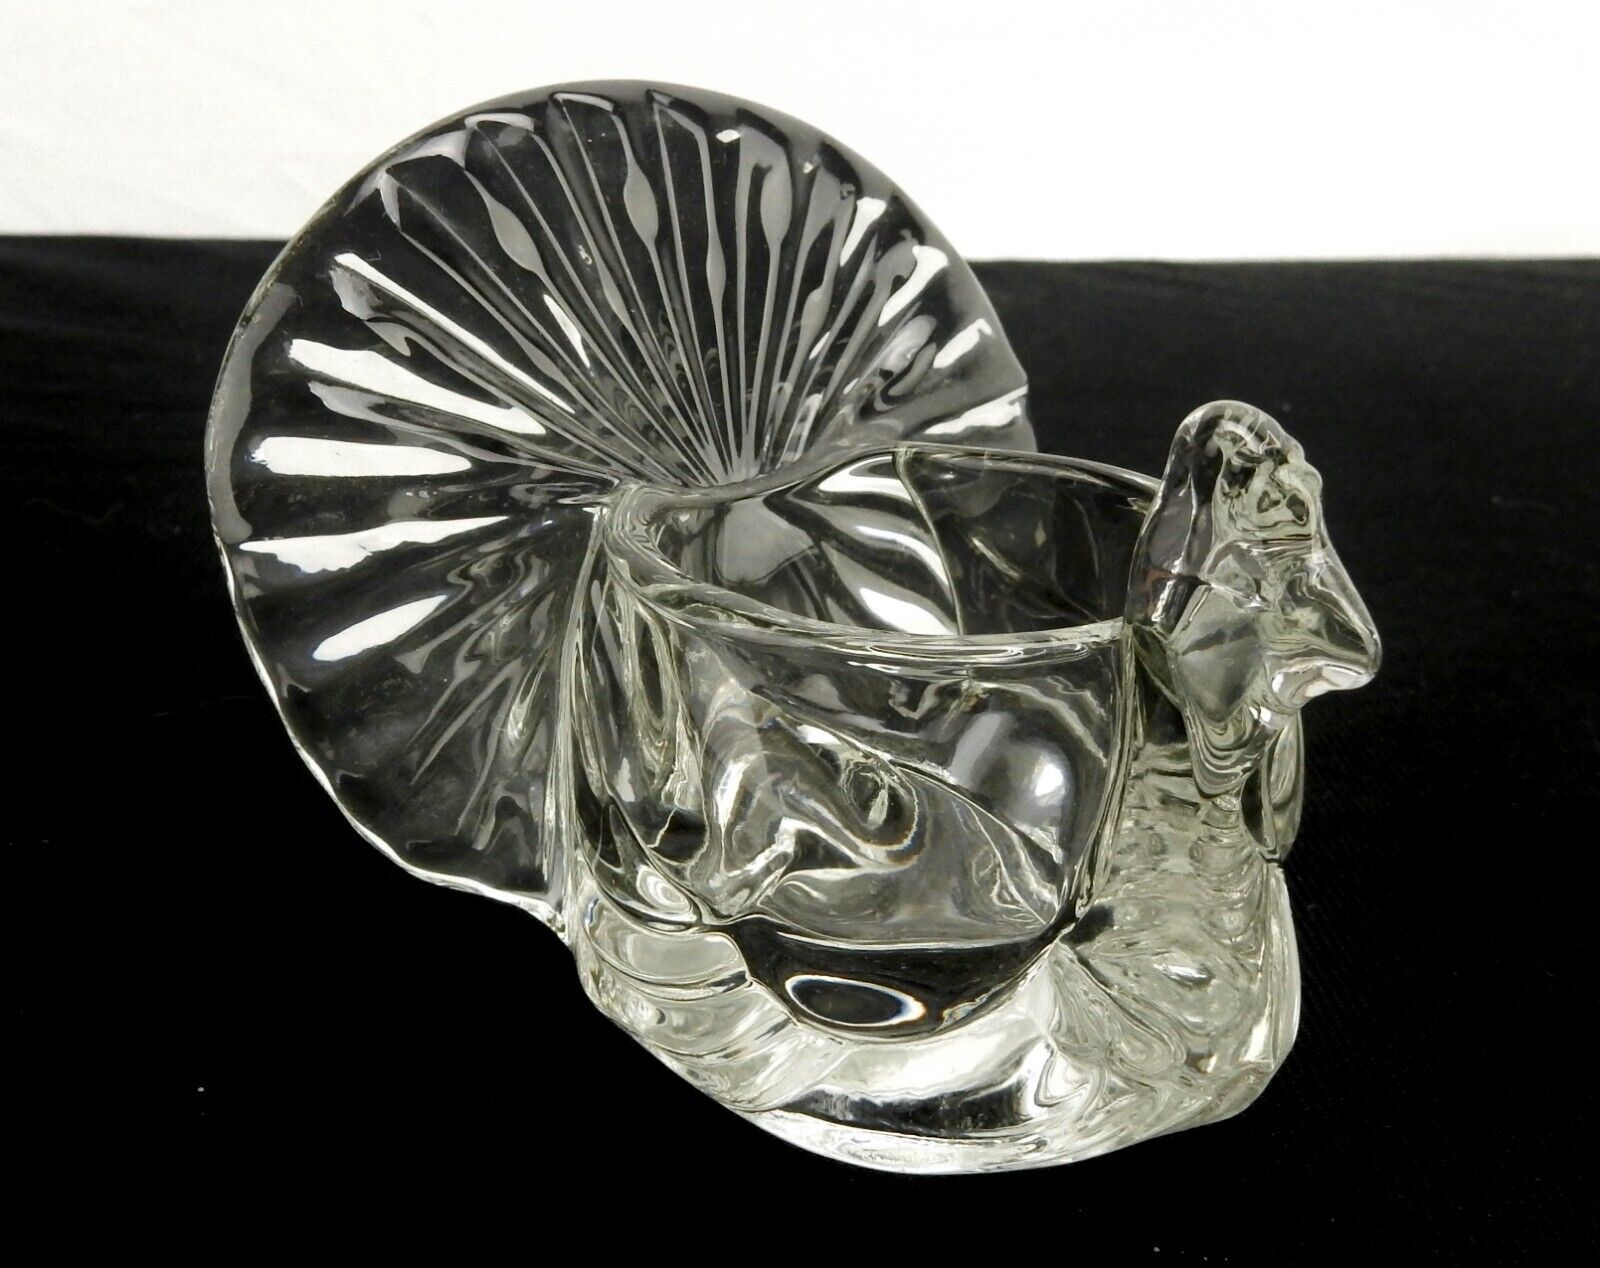 Primary image for AVON Turkey Figural Votive Candle Holder, Clear Glass, Thanksgiving Home Decor